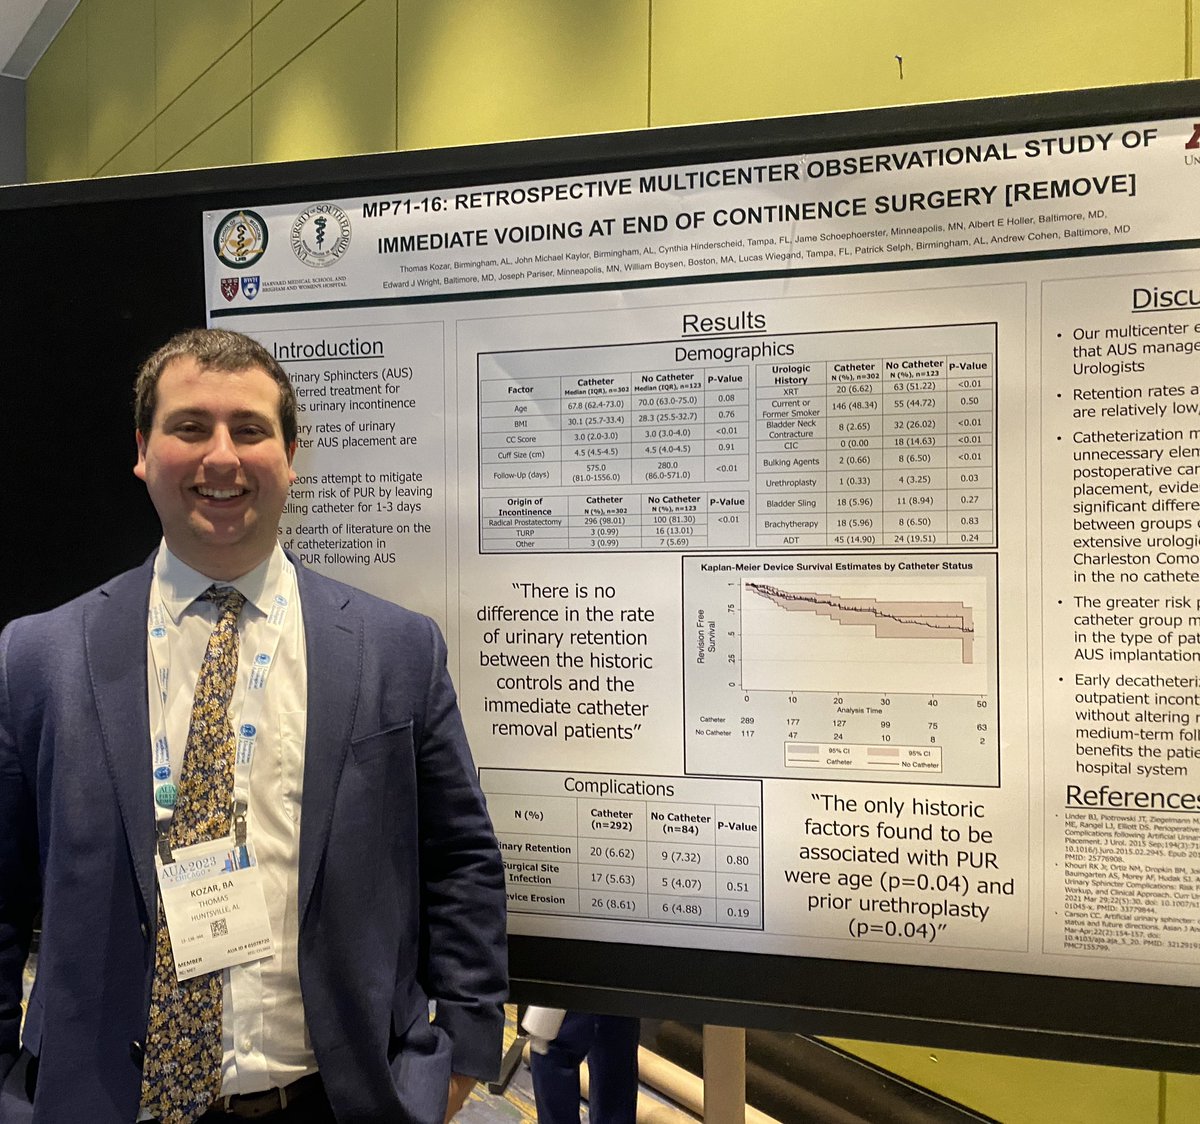 #AUA2023 was a great experience! Got to present, meet some great people and mentors, and learned a ton! Thank you to my mentors on the REMOVE study! @AJCuro @PatrickSelph @pariserj @WilliamBoysenMD @wiegand_luke